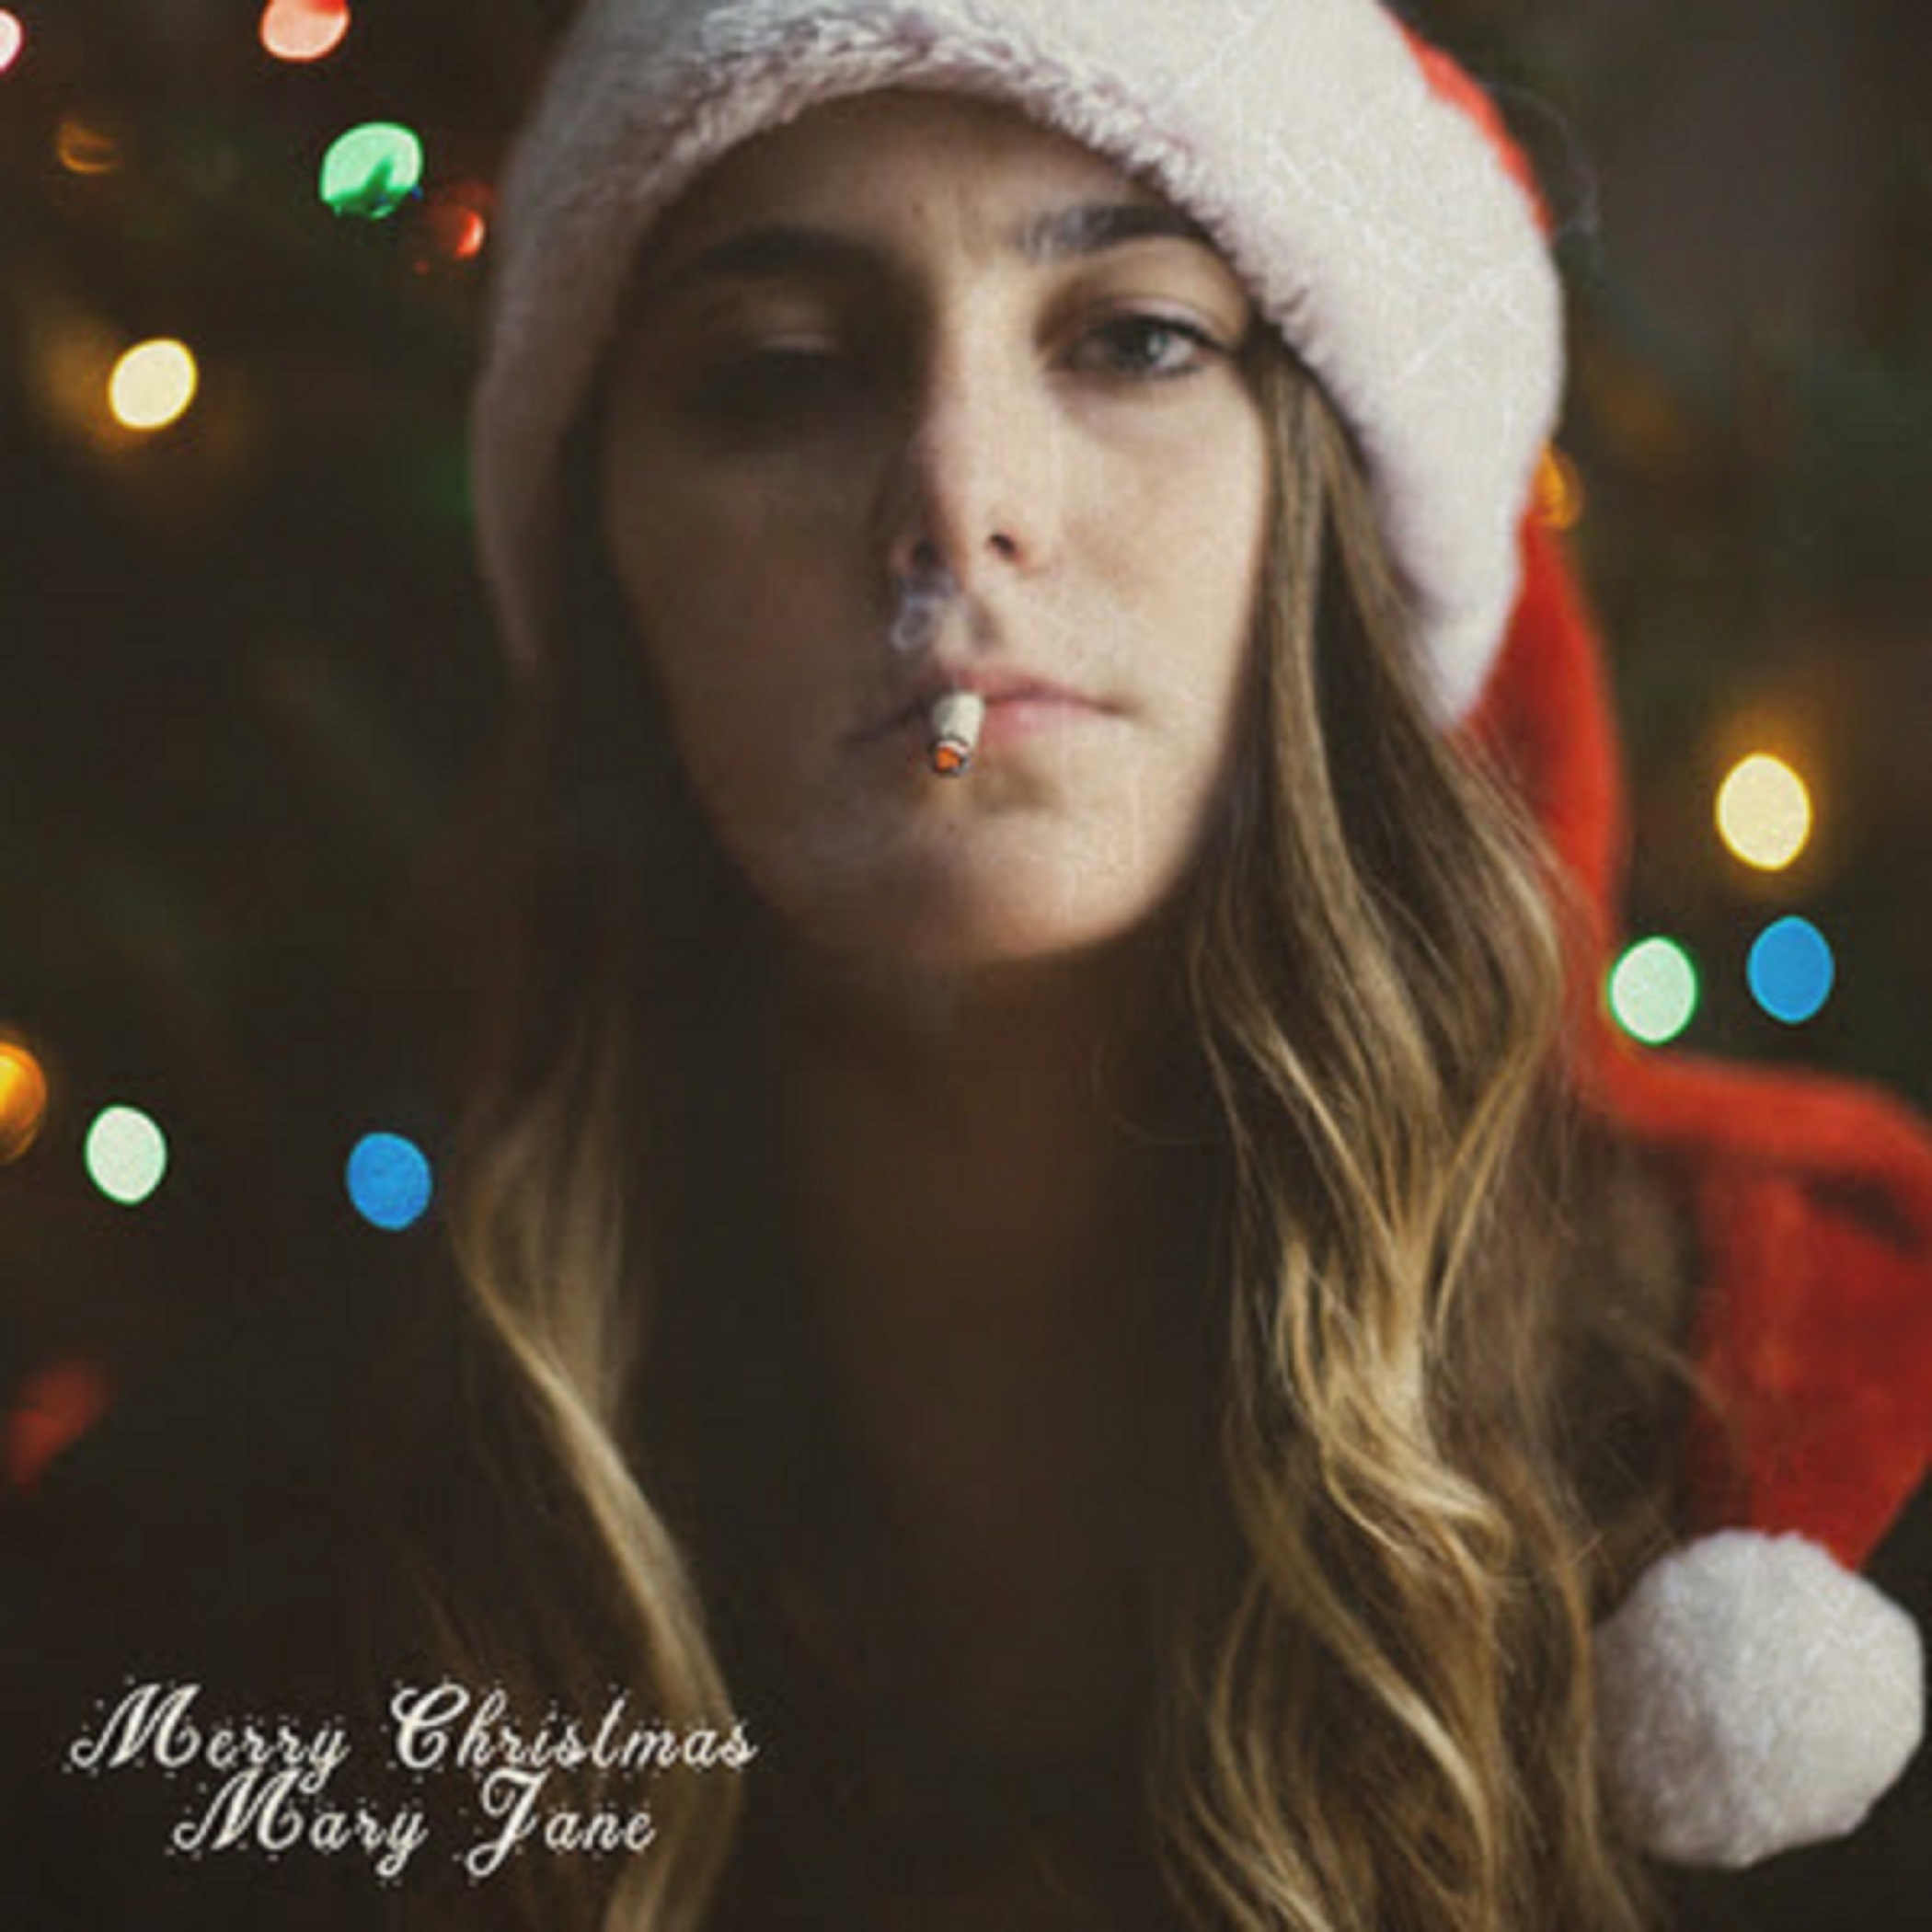 Katie Pruitt’s new song “Merry Christmas Mary Jane” debuts today